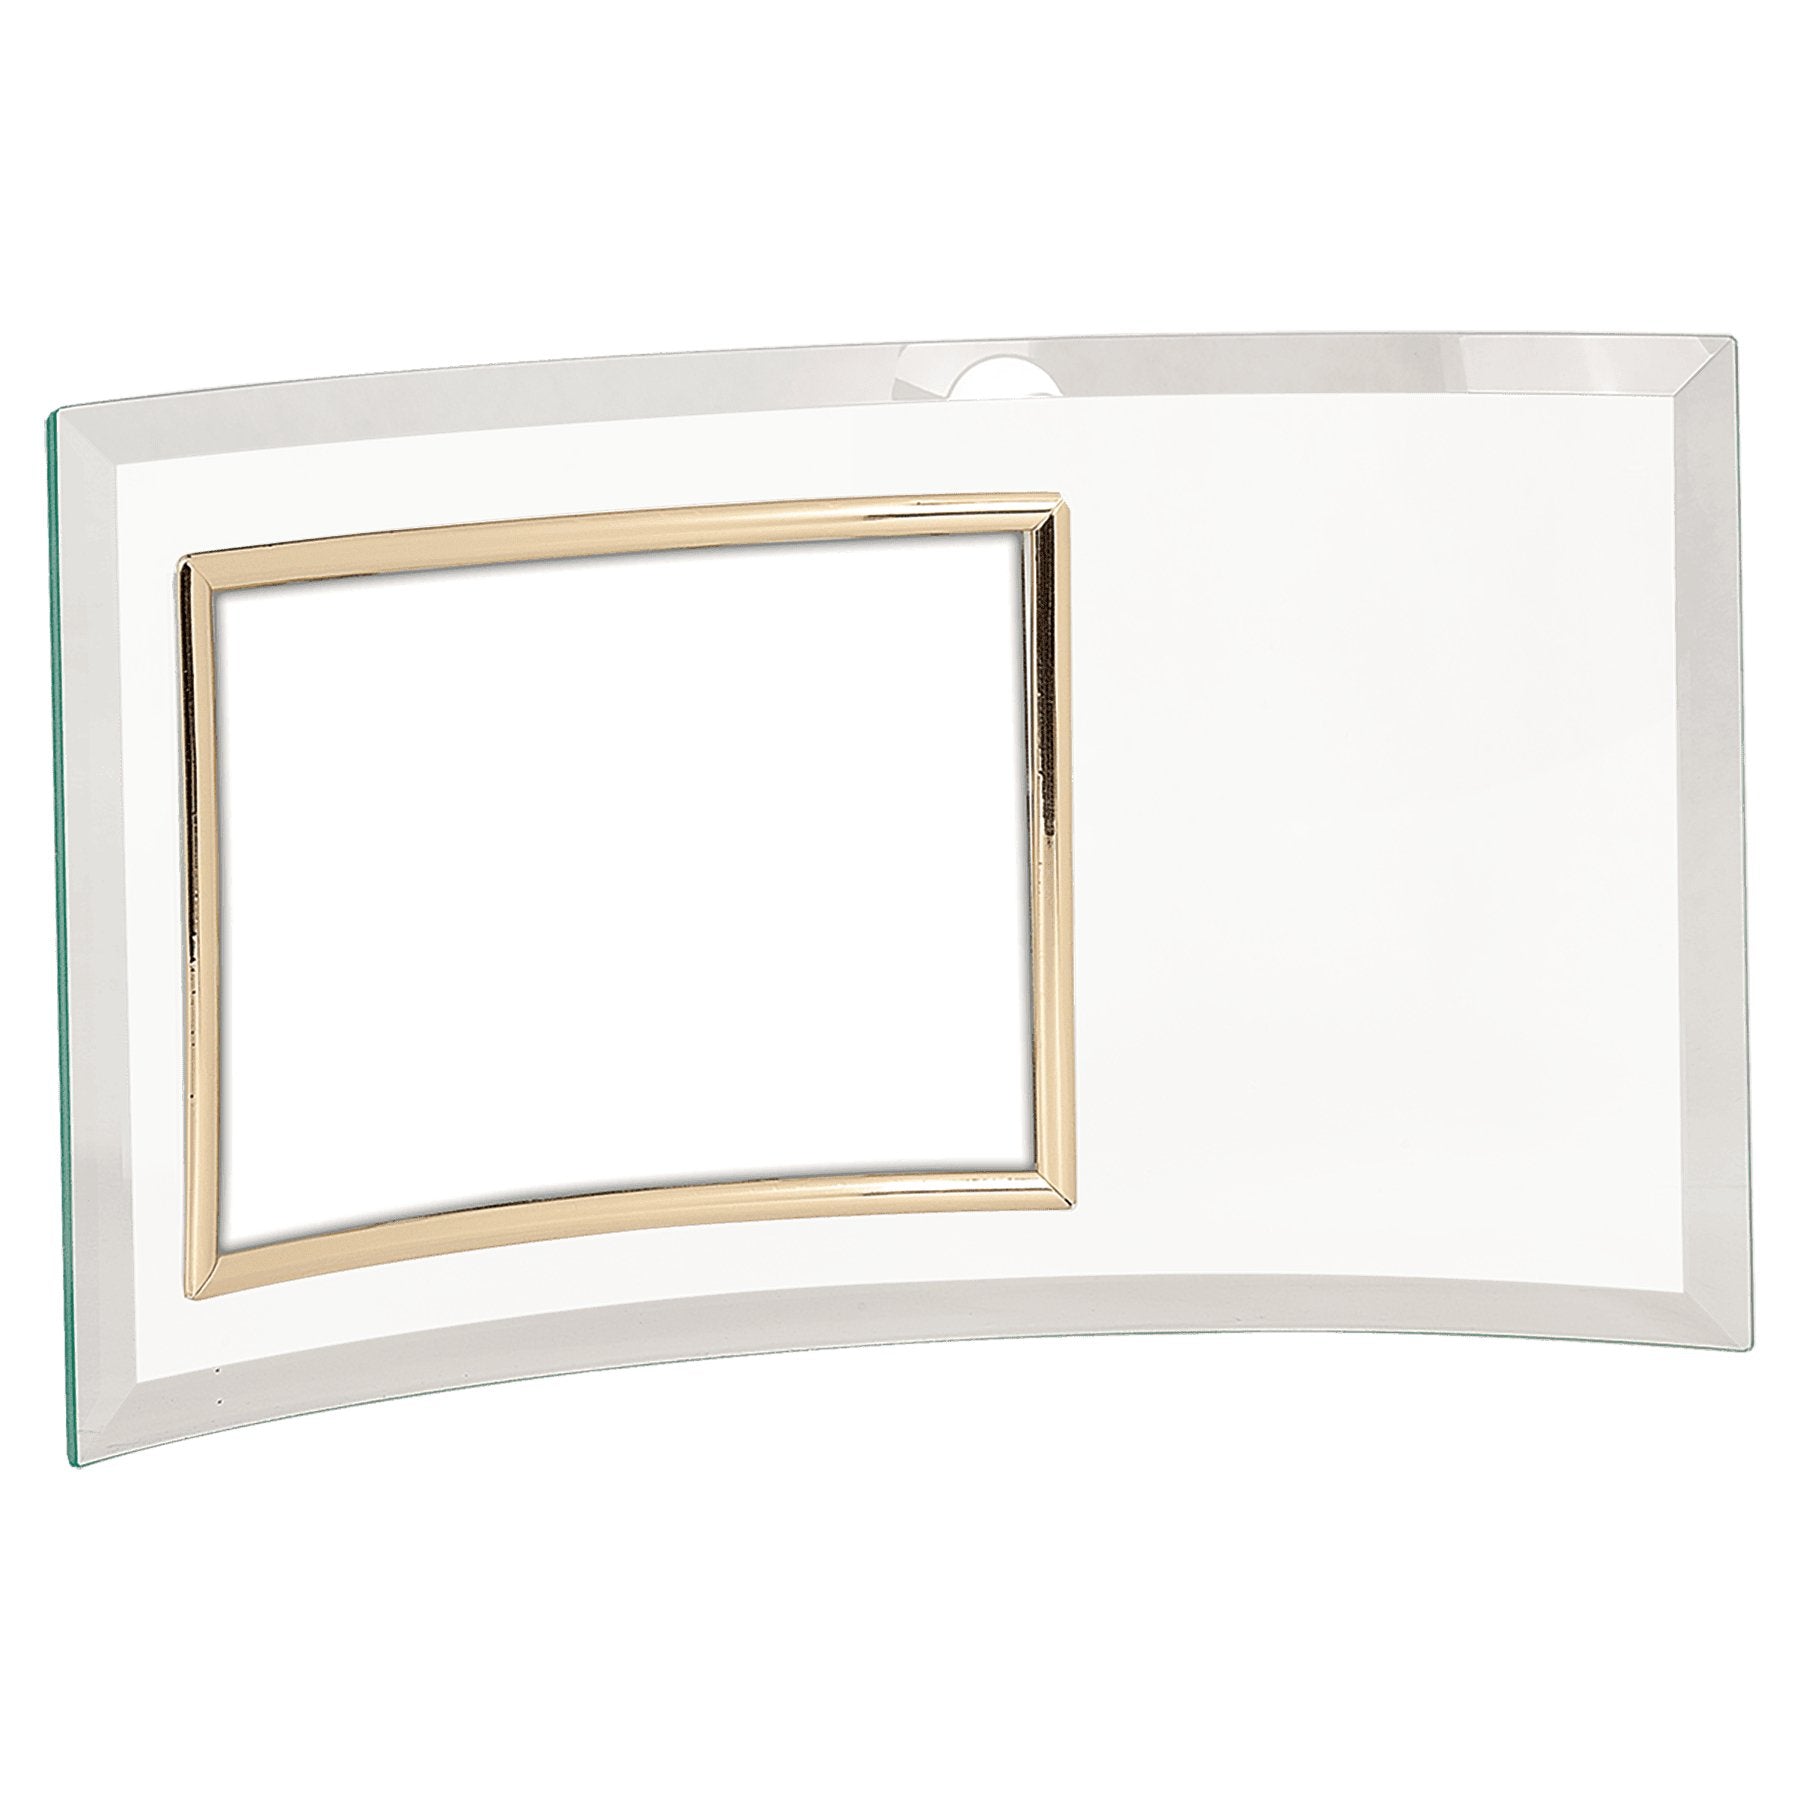 Elegantly Personalized Jade Glass Crescent with Picture Frame - Legacy Creator Inc13" x 7 1/2" Jade Glass Crescent with 7" x 5" Picture Frame